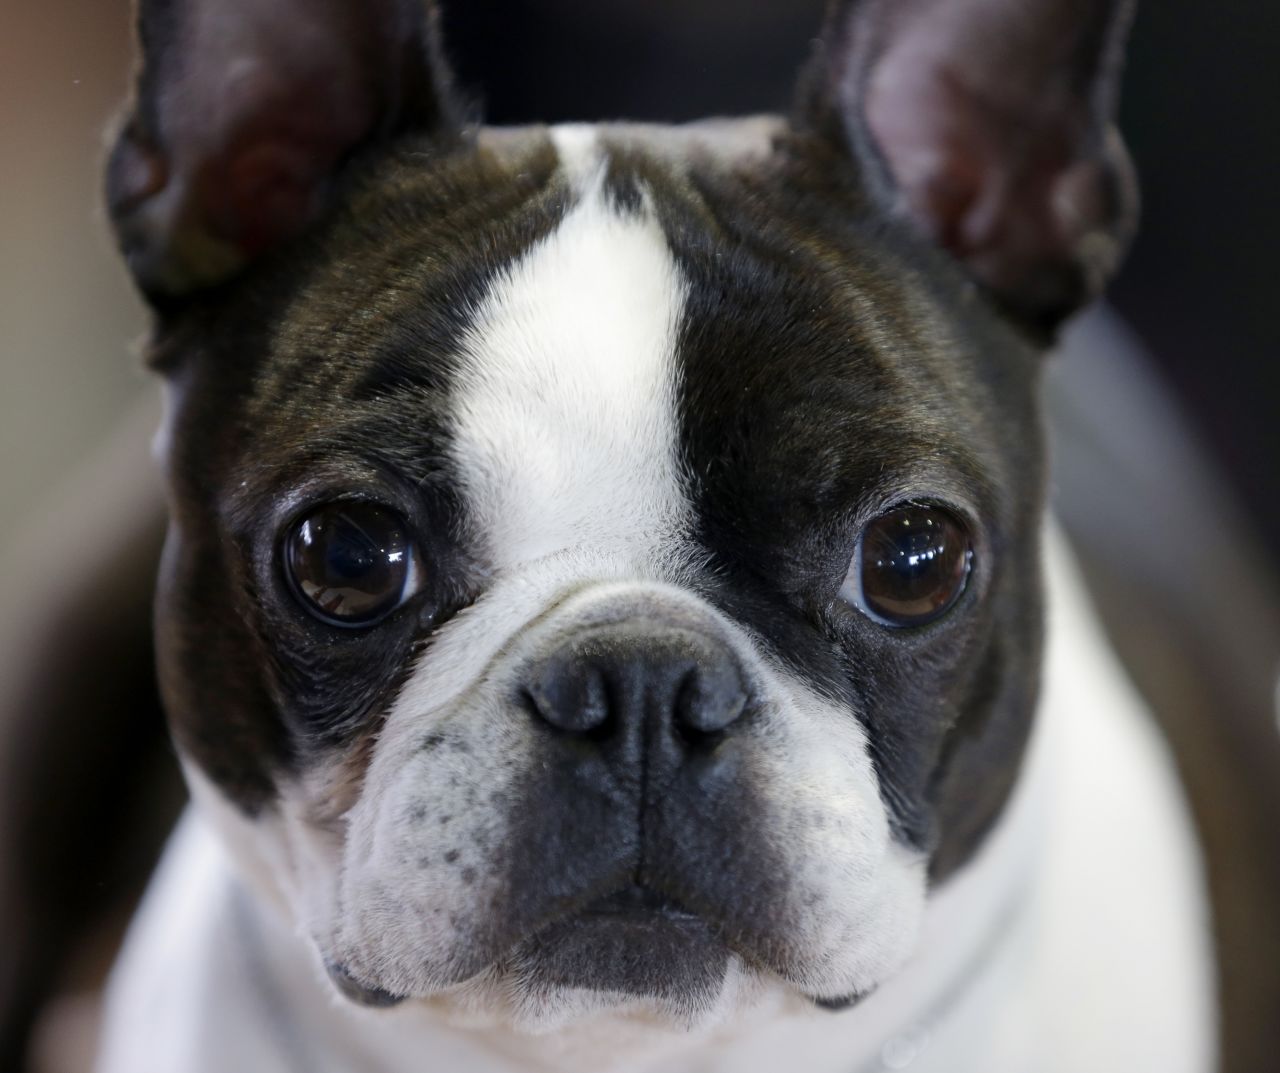 A Boston terrier named Mango relaxes during the show on February 16.